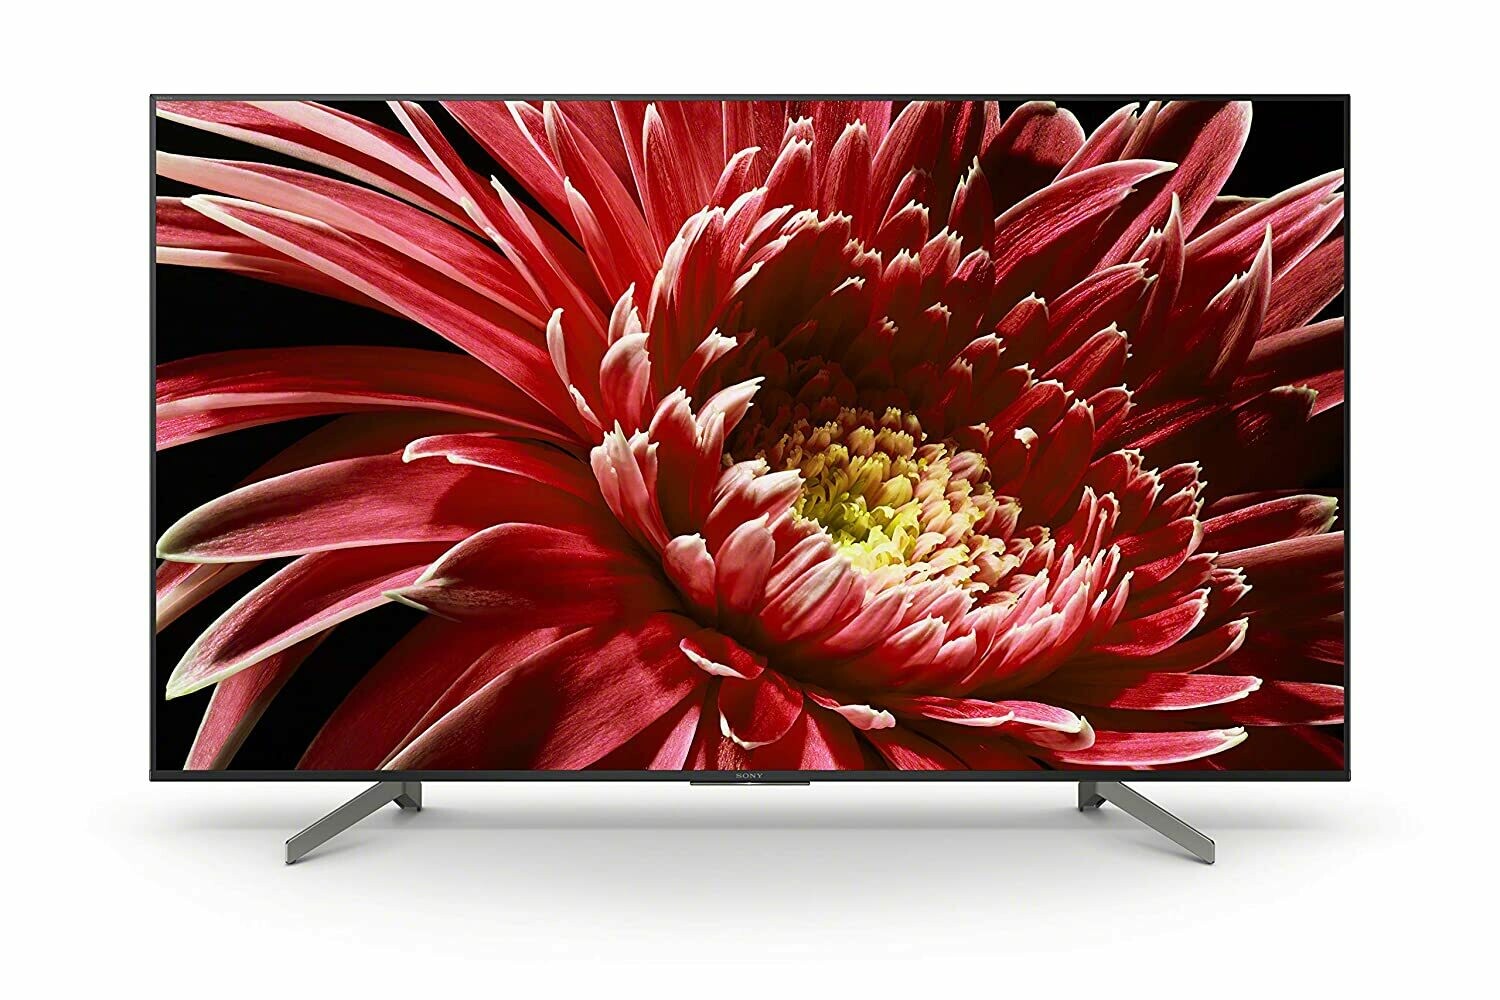 Sony Bravia 138 cm (55 inches) 4K Ultra HD Certified Android LED TV KD-55X8500G